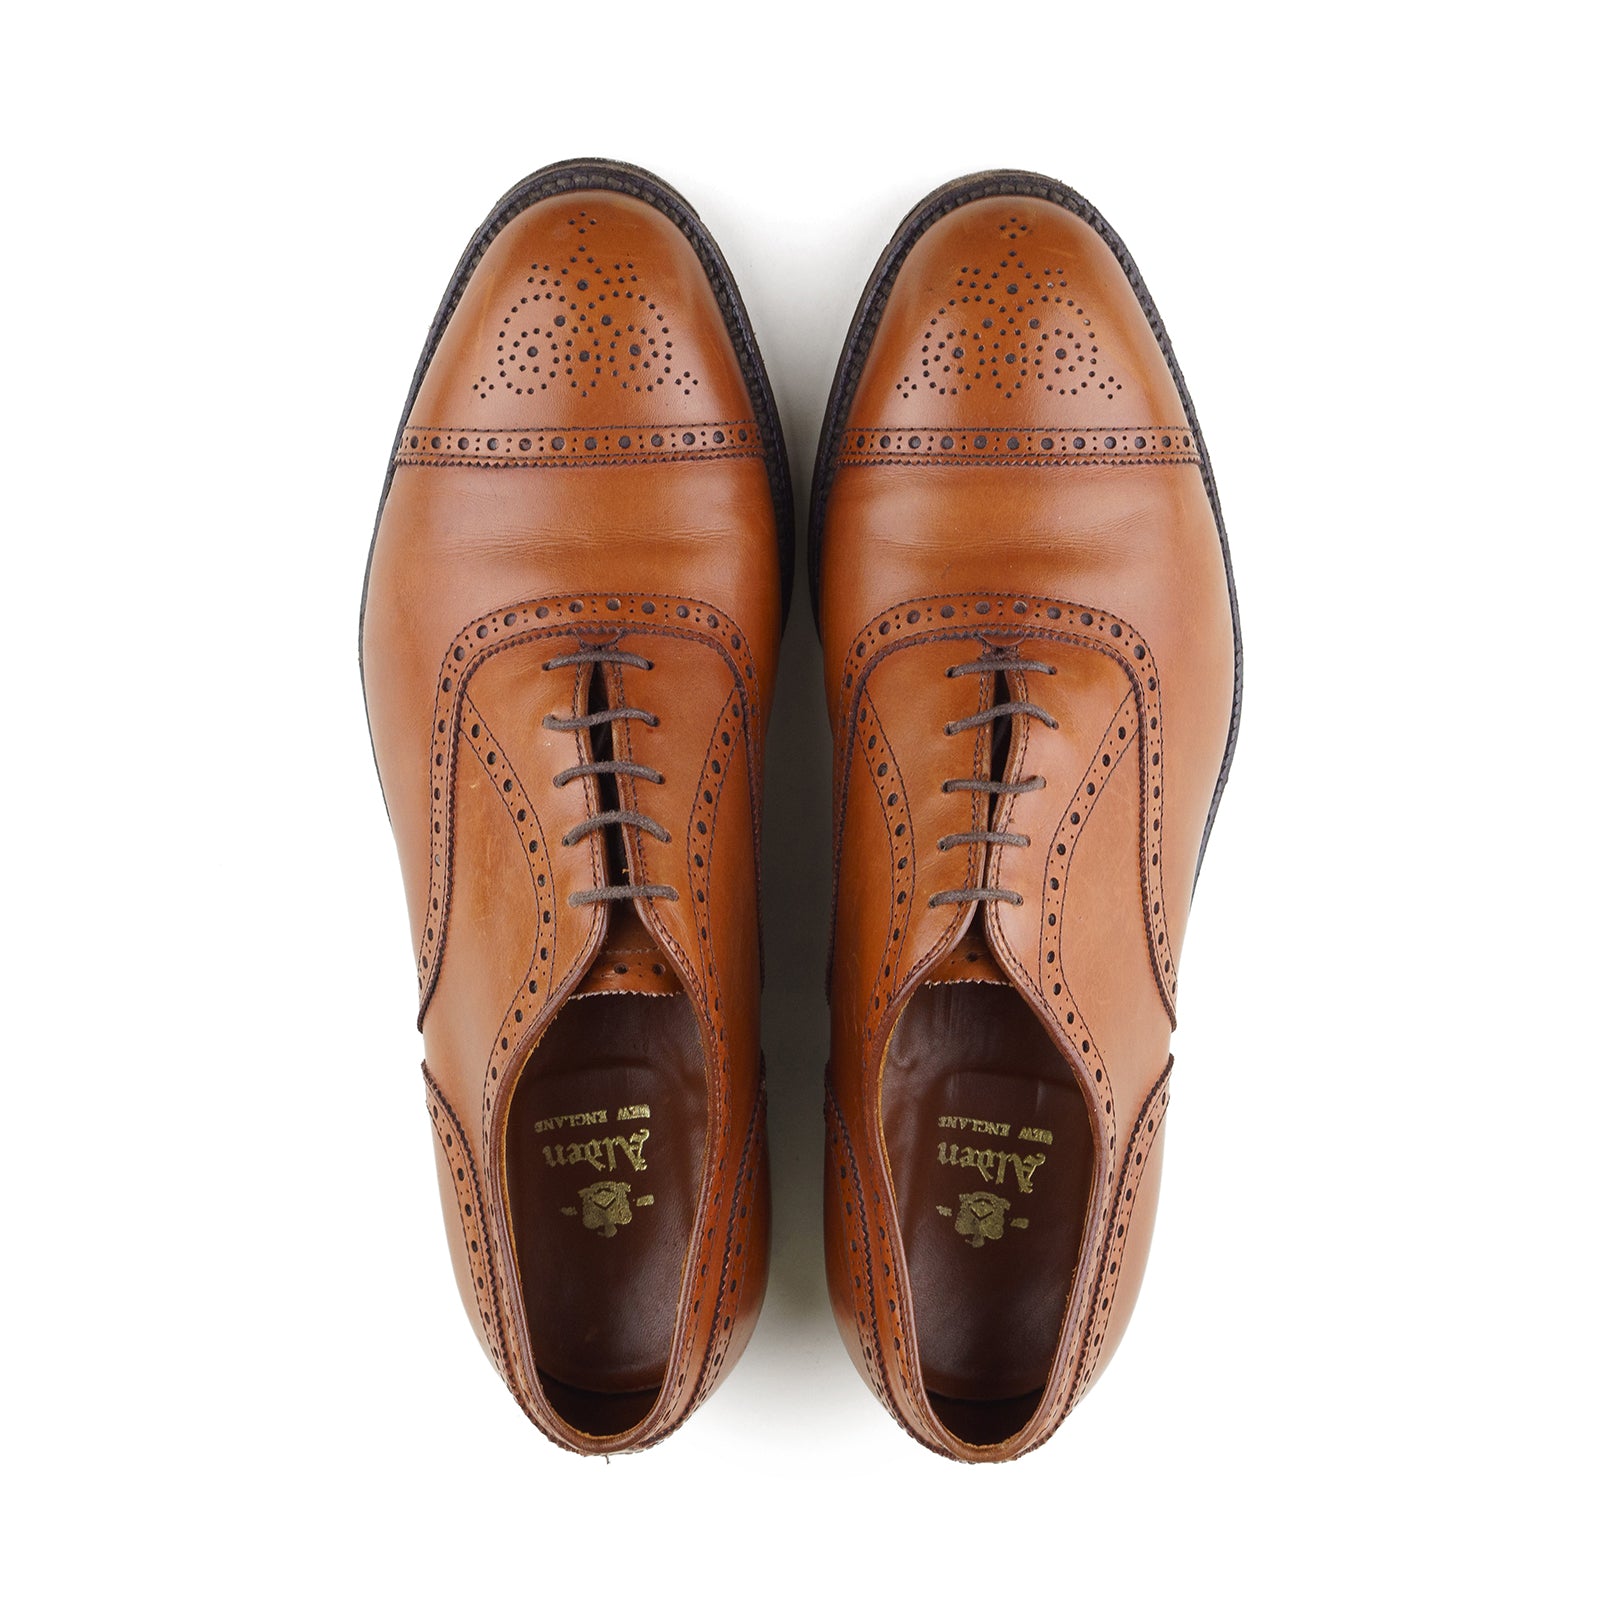 Style 911 - Tan Calfskin (Pre-Owned)